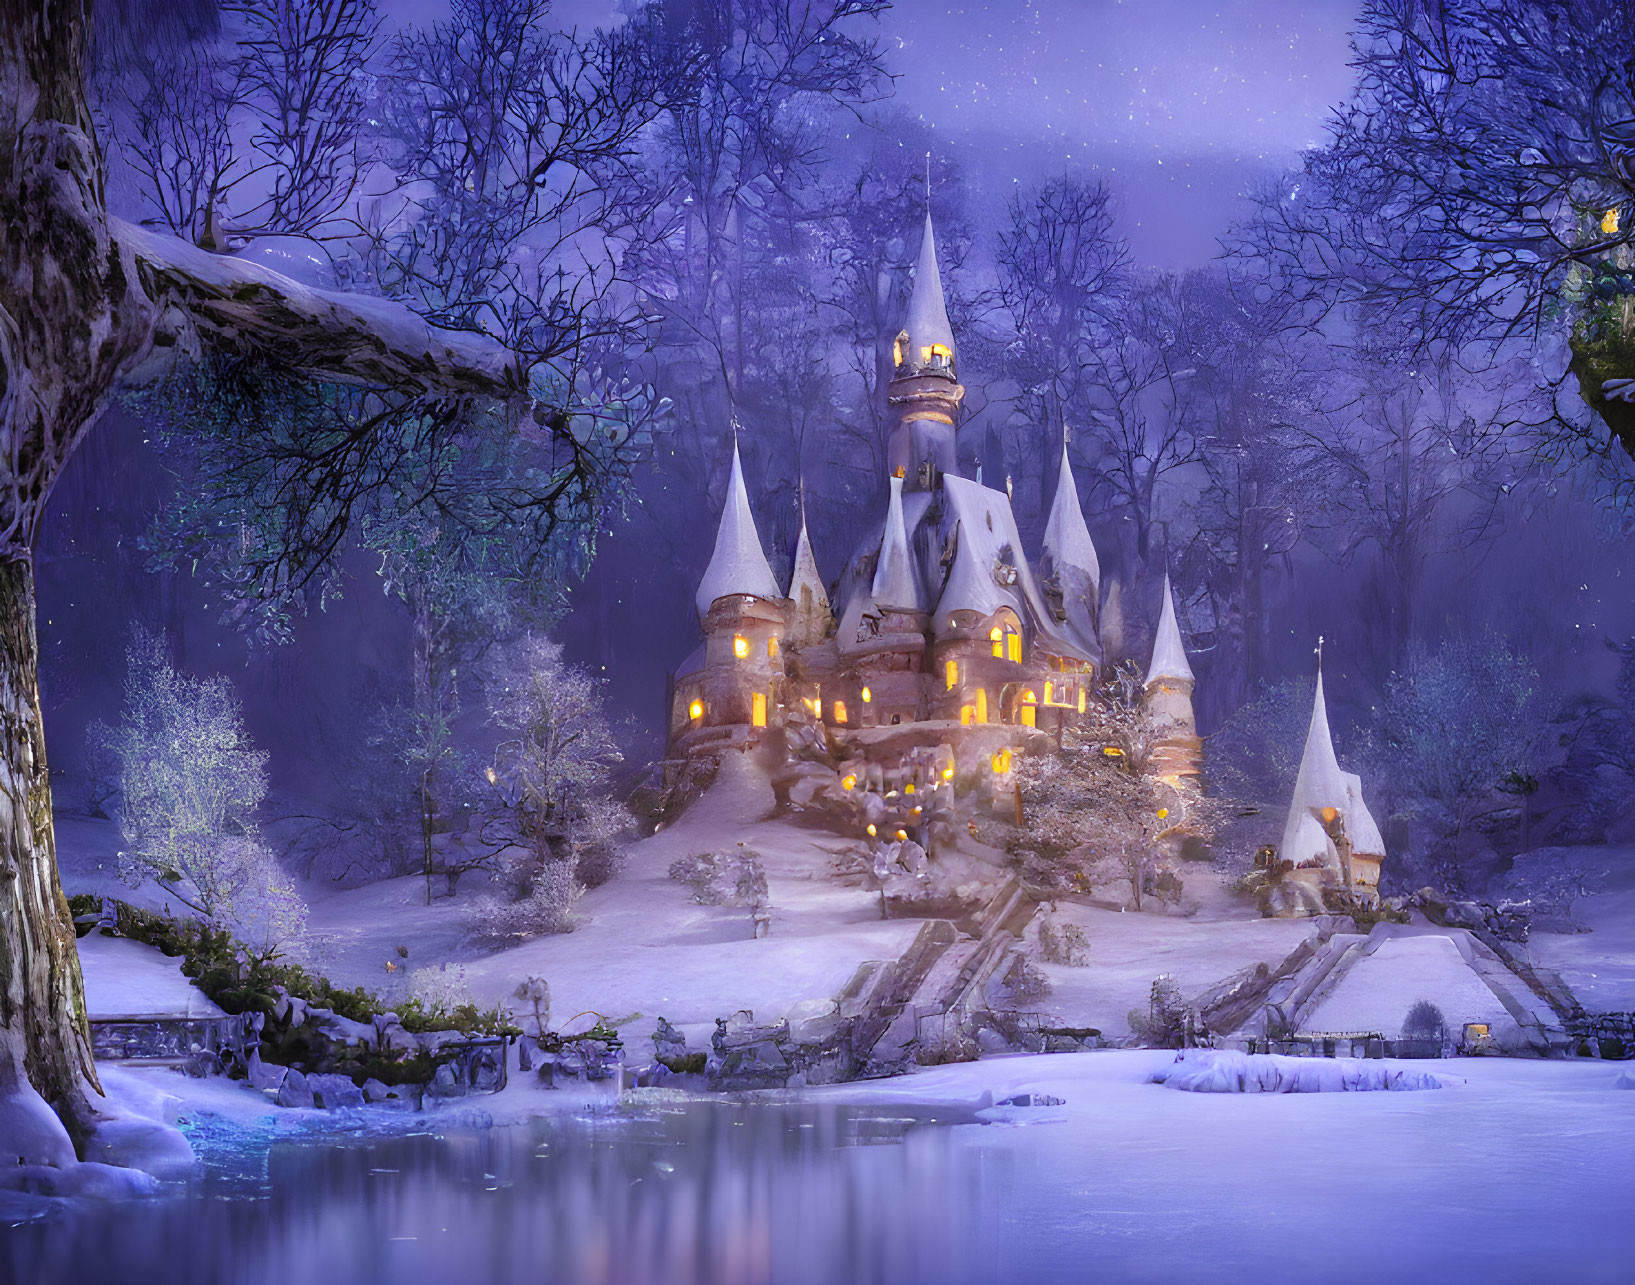 Snow-covered castle in winter forest at dusk with glowing windows